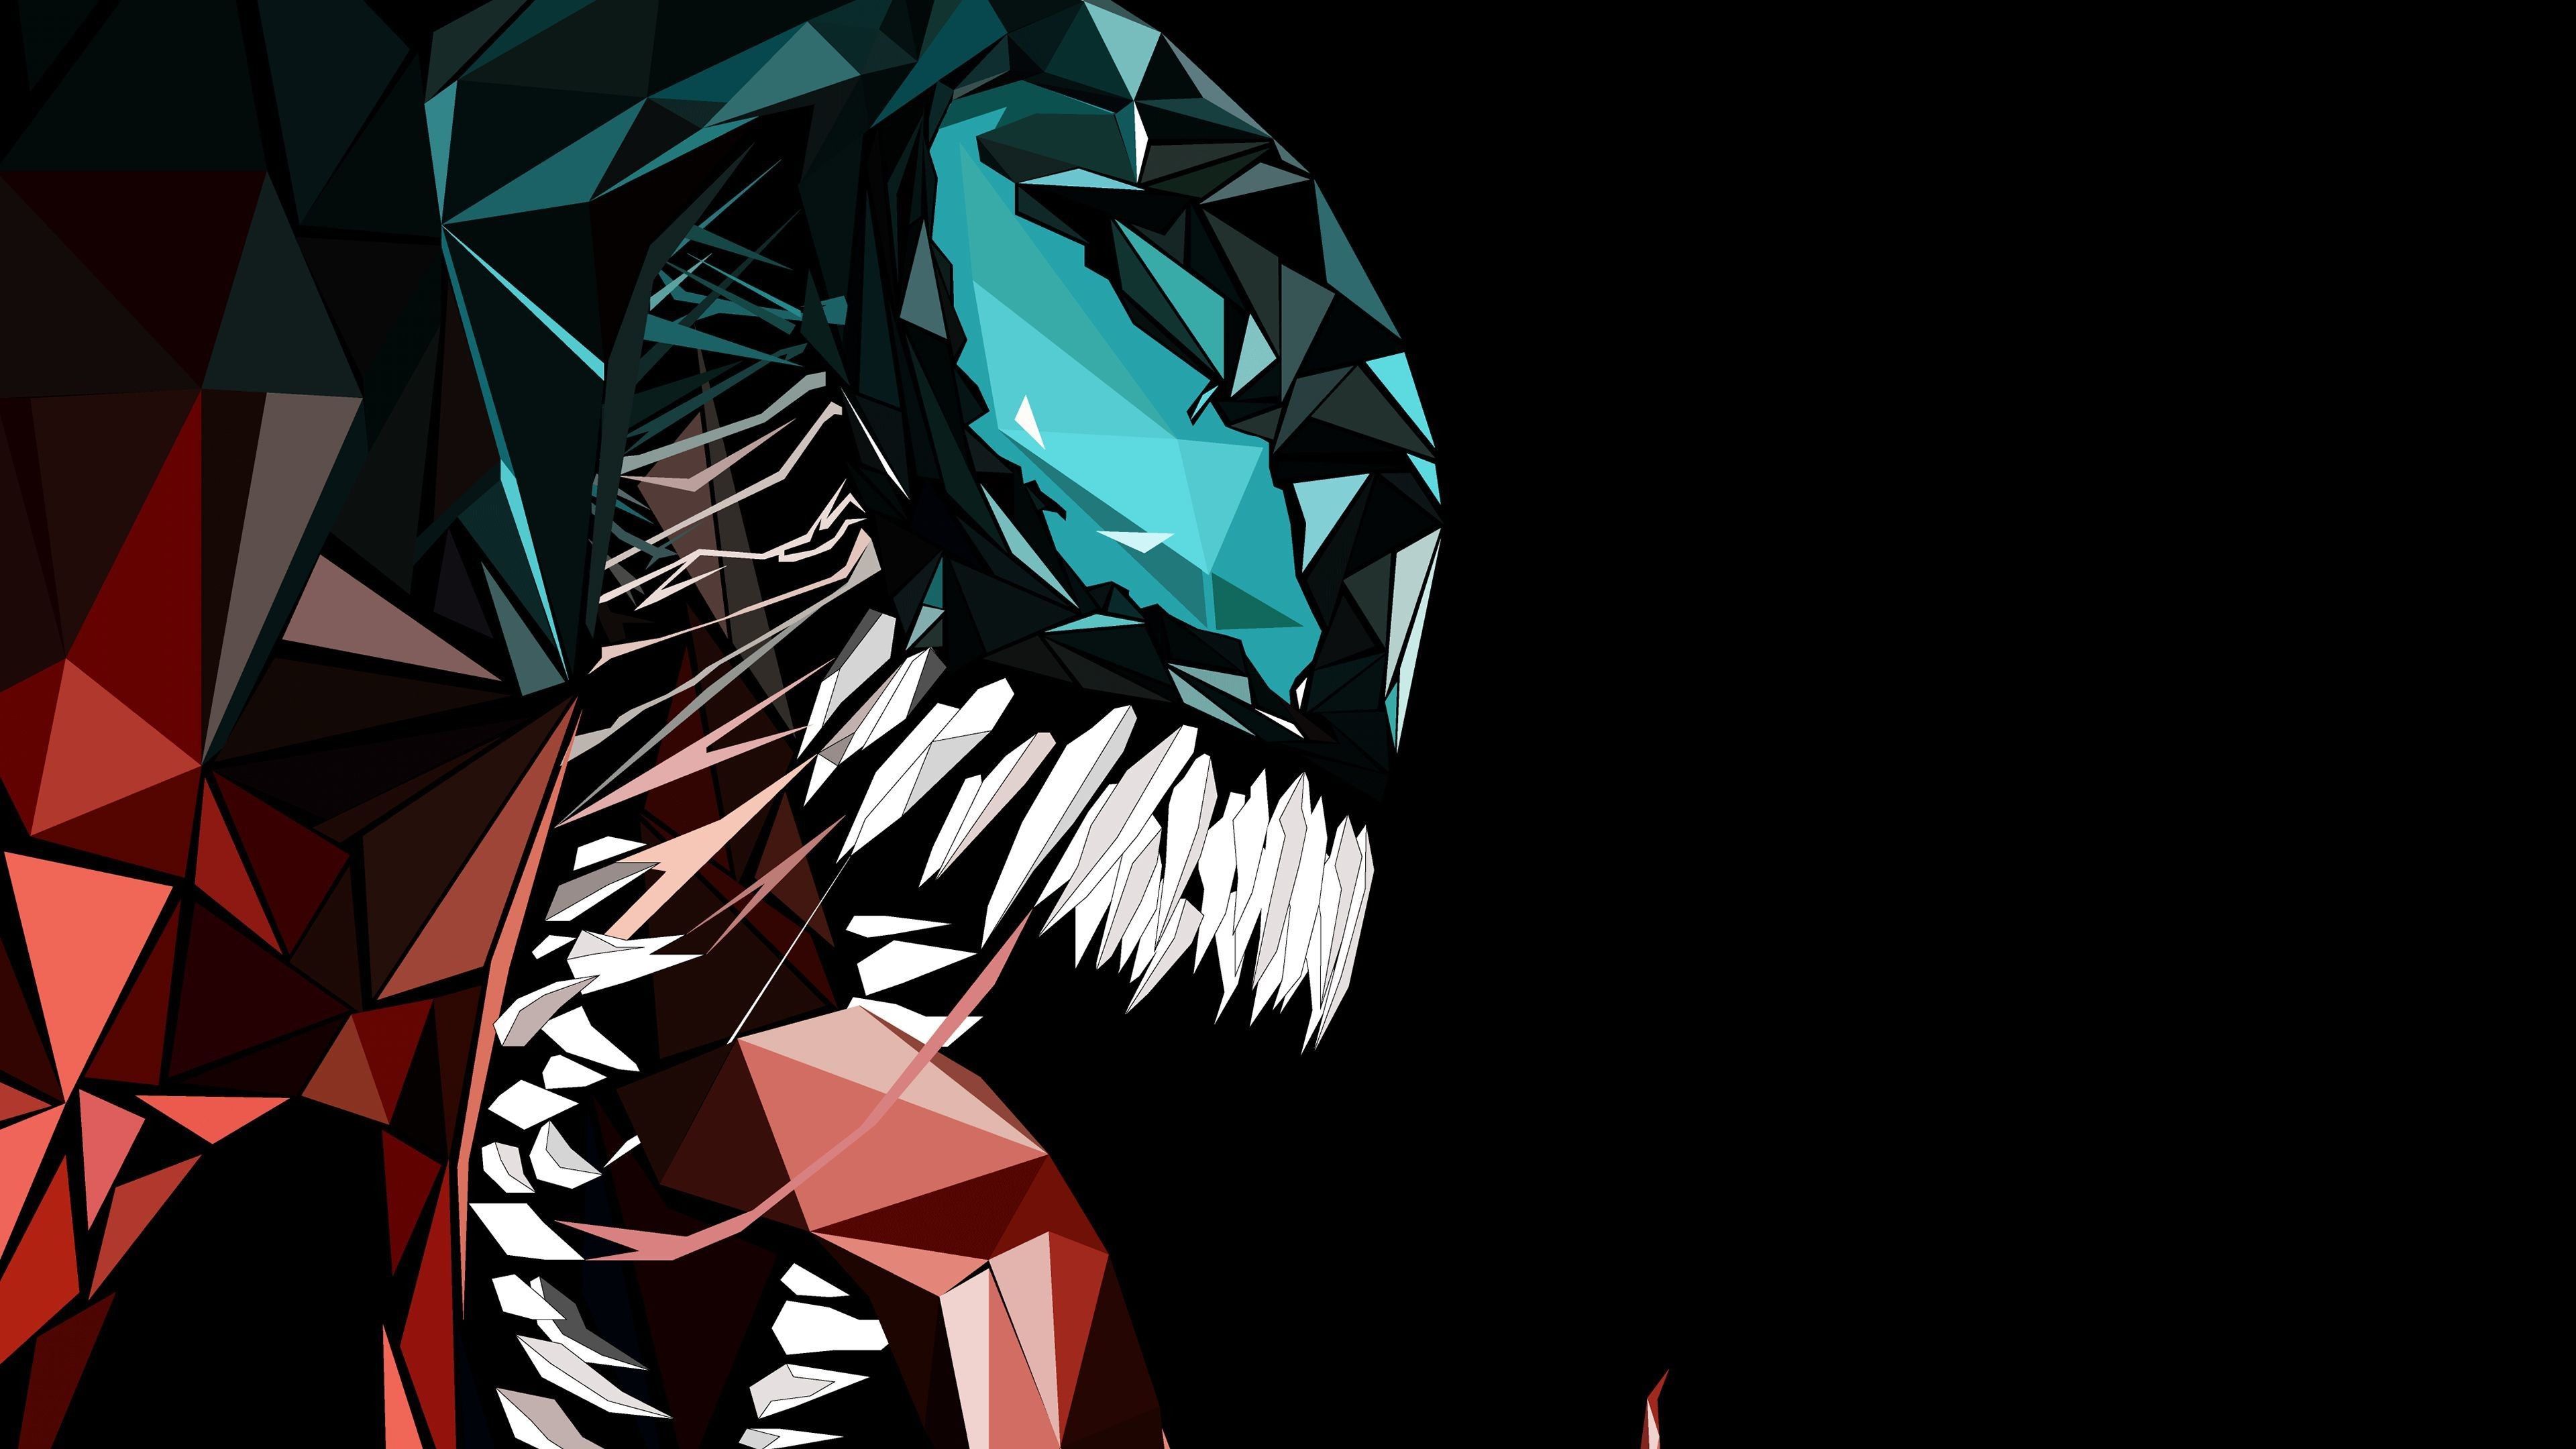 Venom Hd Artwork HD Superheroes 4k Wallpapers Images Backgrounds  Photos and Pictures